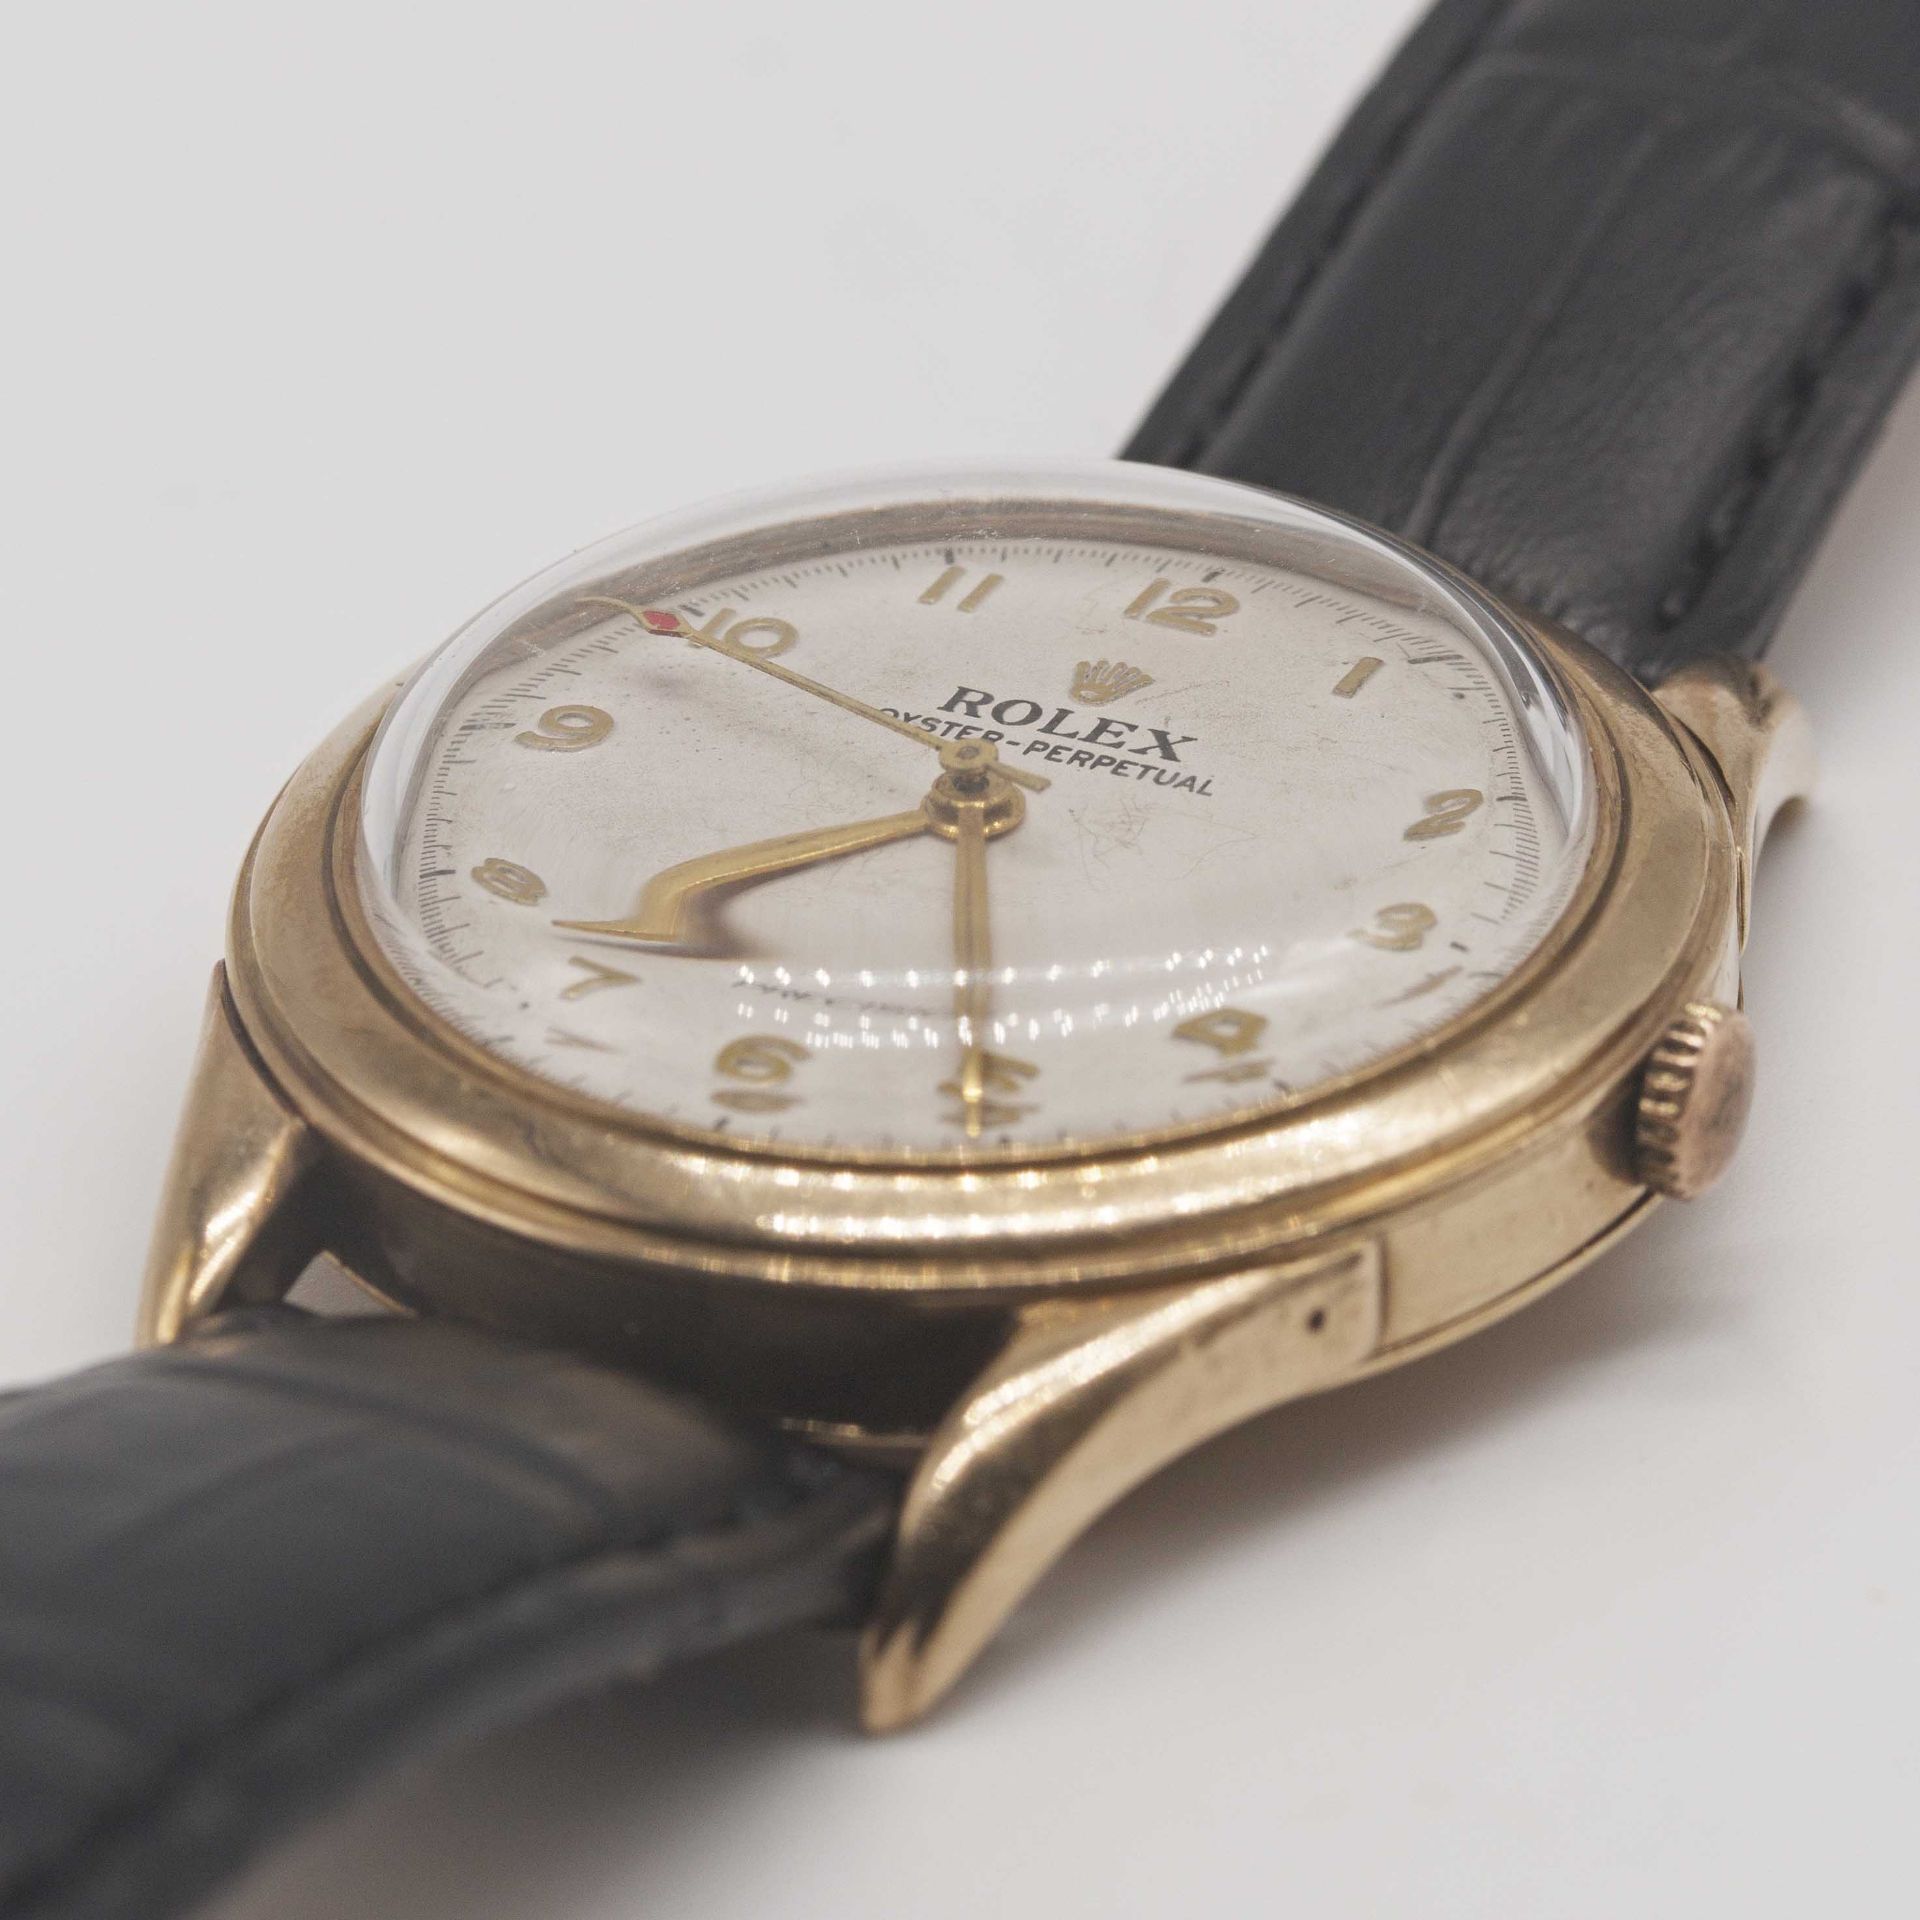 A GENTLEMAN'S 9CT SOLID GOLD ROLEX OYSTER PERPETUAL WRIST WATCH CIRCA 1950s Movement: Automatic " - Image 3 of 10